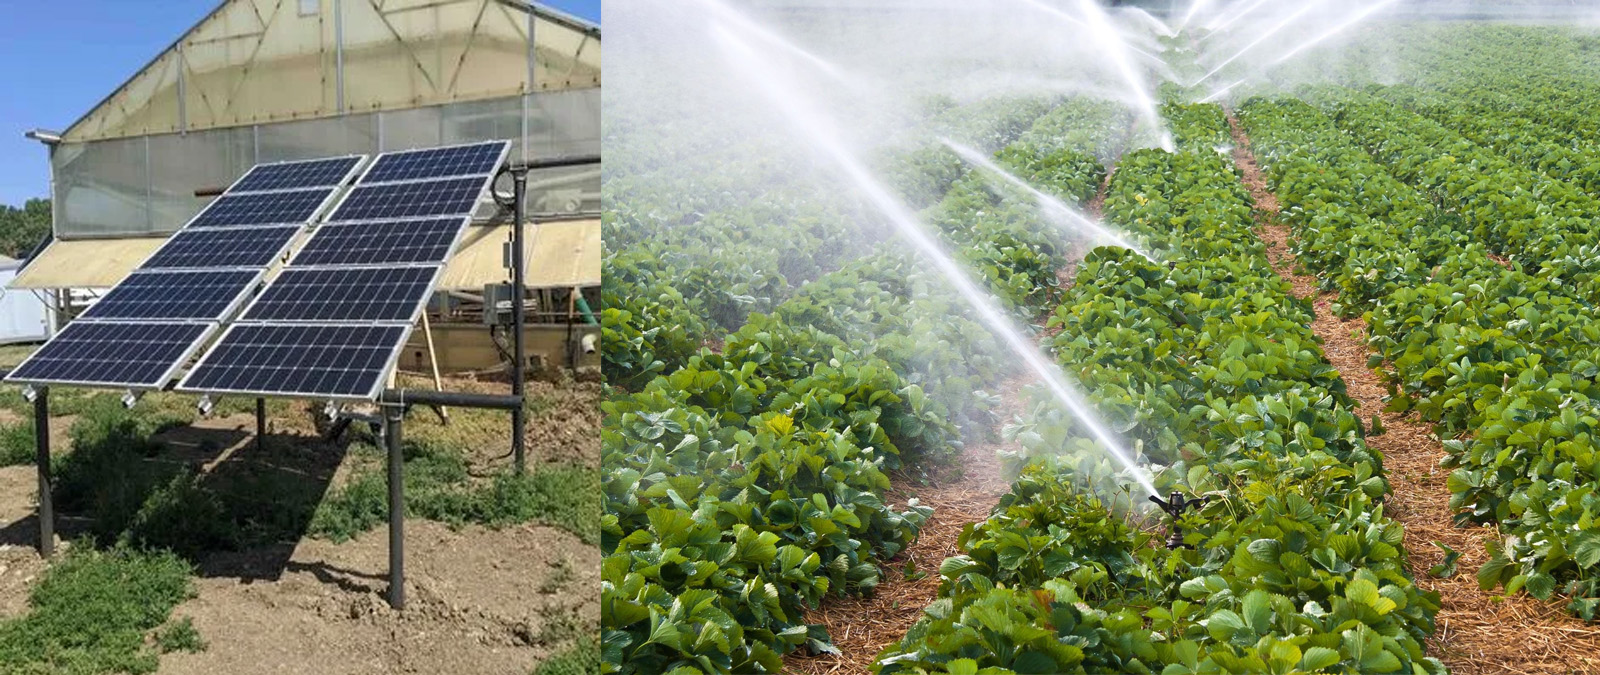 solar pump irrigation system for strewberry orchard